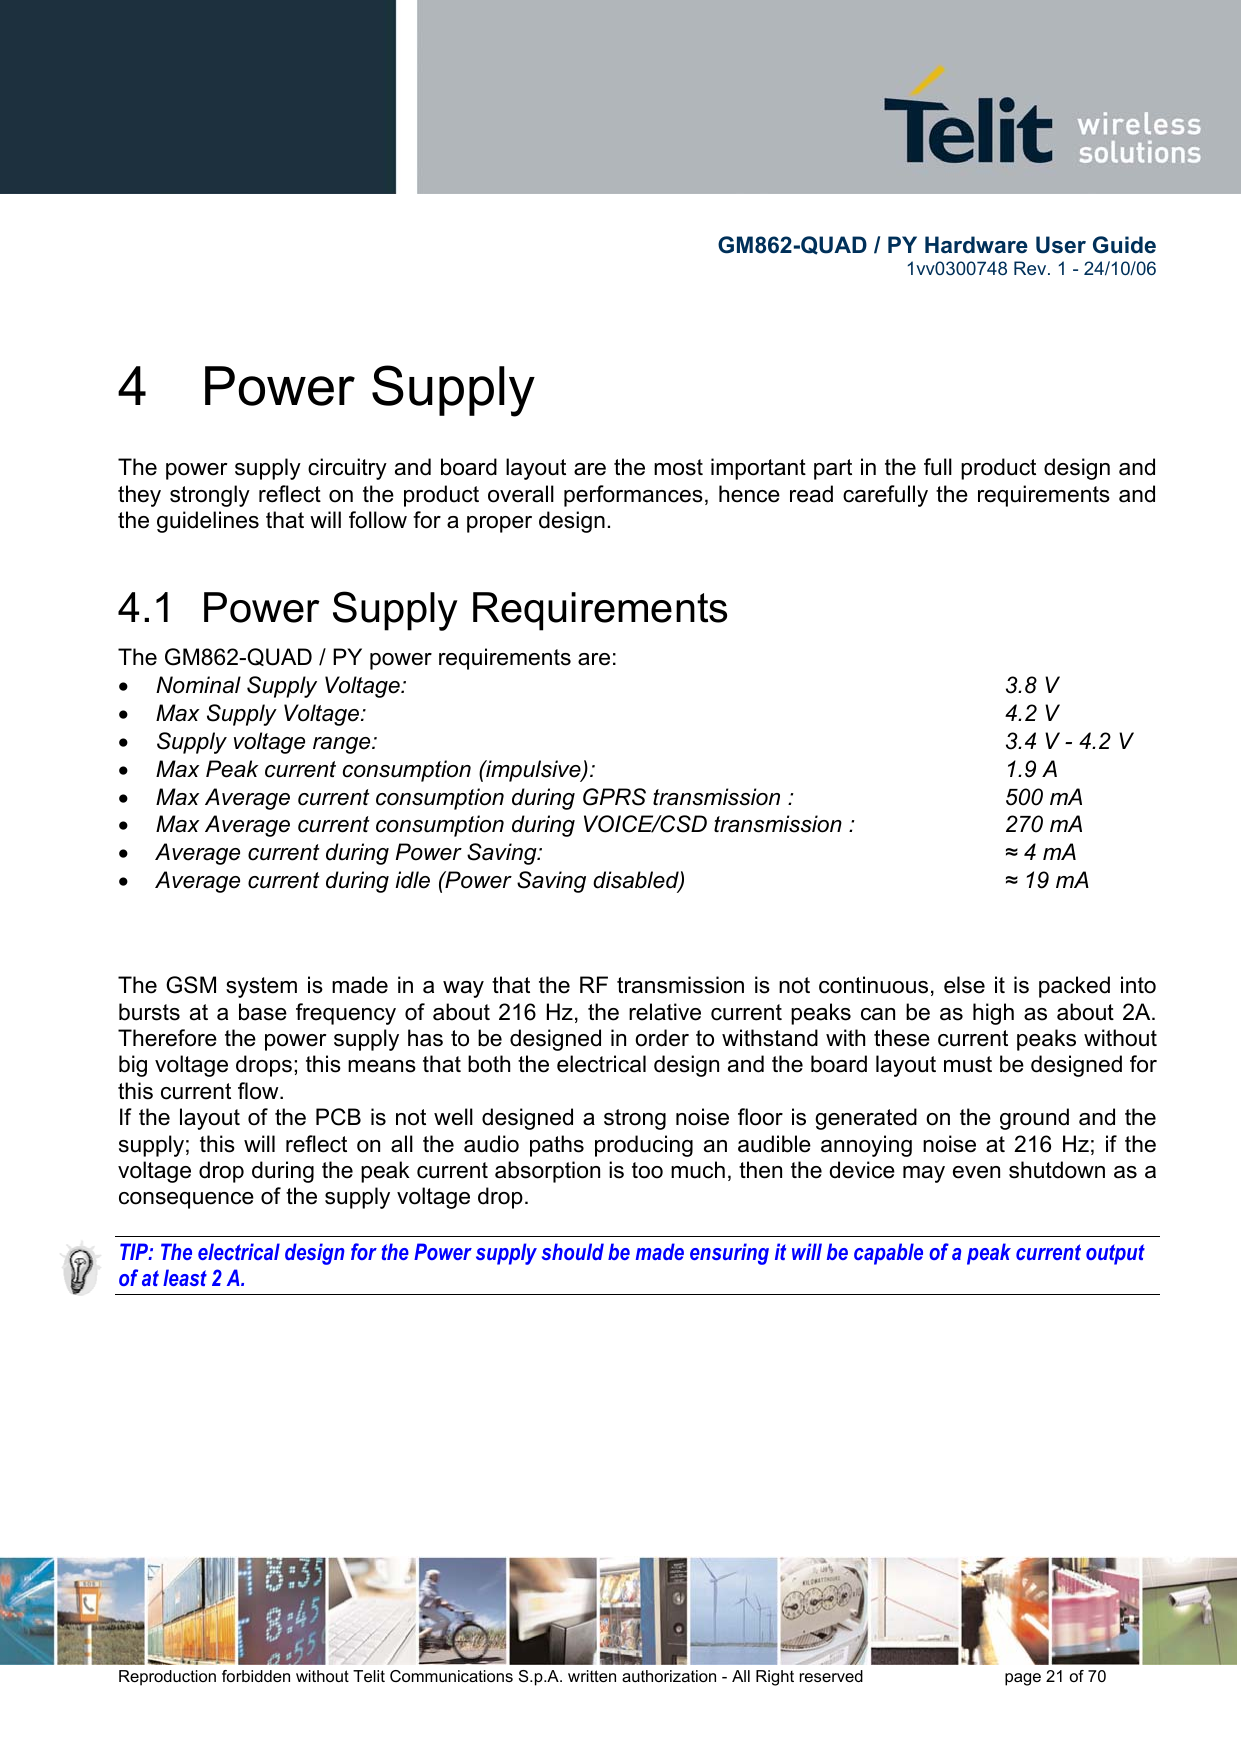        GM862-QUAD / PY Hardware User Guide   1vv0300748 Rev. 1 - 24/10/06    Reproduction forbidden without Telit Communications S.p.A. written authorization - All Right reserved    page 21 of 70  4 Power Supply The power supply circuitry and board layout are the most important part in the full product design and they strongly reflect on the product overall performances, hence read carefully the requirements and the guidelines that will follow for a proper design. 4.1  Power Supply Requirements The GM862-QUAD / PY power requirements are:  •  Nominal Supply Voltage:       3.8 V •  Max Supply Voltage:        4.2 V •  Supply voltage range:                     3.4 V - 4.2 V •  Max Peak current consumption (impulsive):           1.9 A •  Max Average current consumption during GPRS transmission :      500 mA •  Max Average current consumption during VOICE/CSD transmission :    270 mA •  Average current during Power Saving:             ≈ 4 mA •  Average current during idle (Power Saving disabled)        ≈ 19 mA    The GSM system is made in a way that the RF transmission is not continuous, else it is packed into bursts at a base frequency of about 216 Hz, the relative current peaks can be as high as about 2A. Therefore the power supply has to be designed in order to withstand with these current peaks without big voltage drops; this means that both the electrical design and the board layout must be designed for this current flow. If the layout of the PCB is not well designed a strong noise floor is generated on the ground and the supply; this will reflect on all the audio paths producing an audible annoying noise at 216 Hz; if the voltage drop during the peak current absorption is too much, then the device may even shutdown as a consequence of the supply voltage drop.  TIP: The electrical design for the Power supply should be made ensuring it will be capable of a peak current output of at least 2 A.  